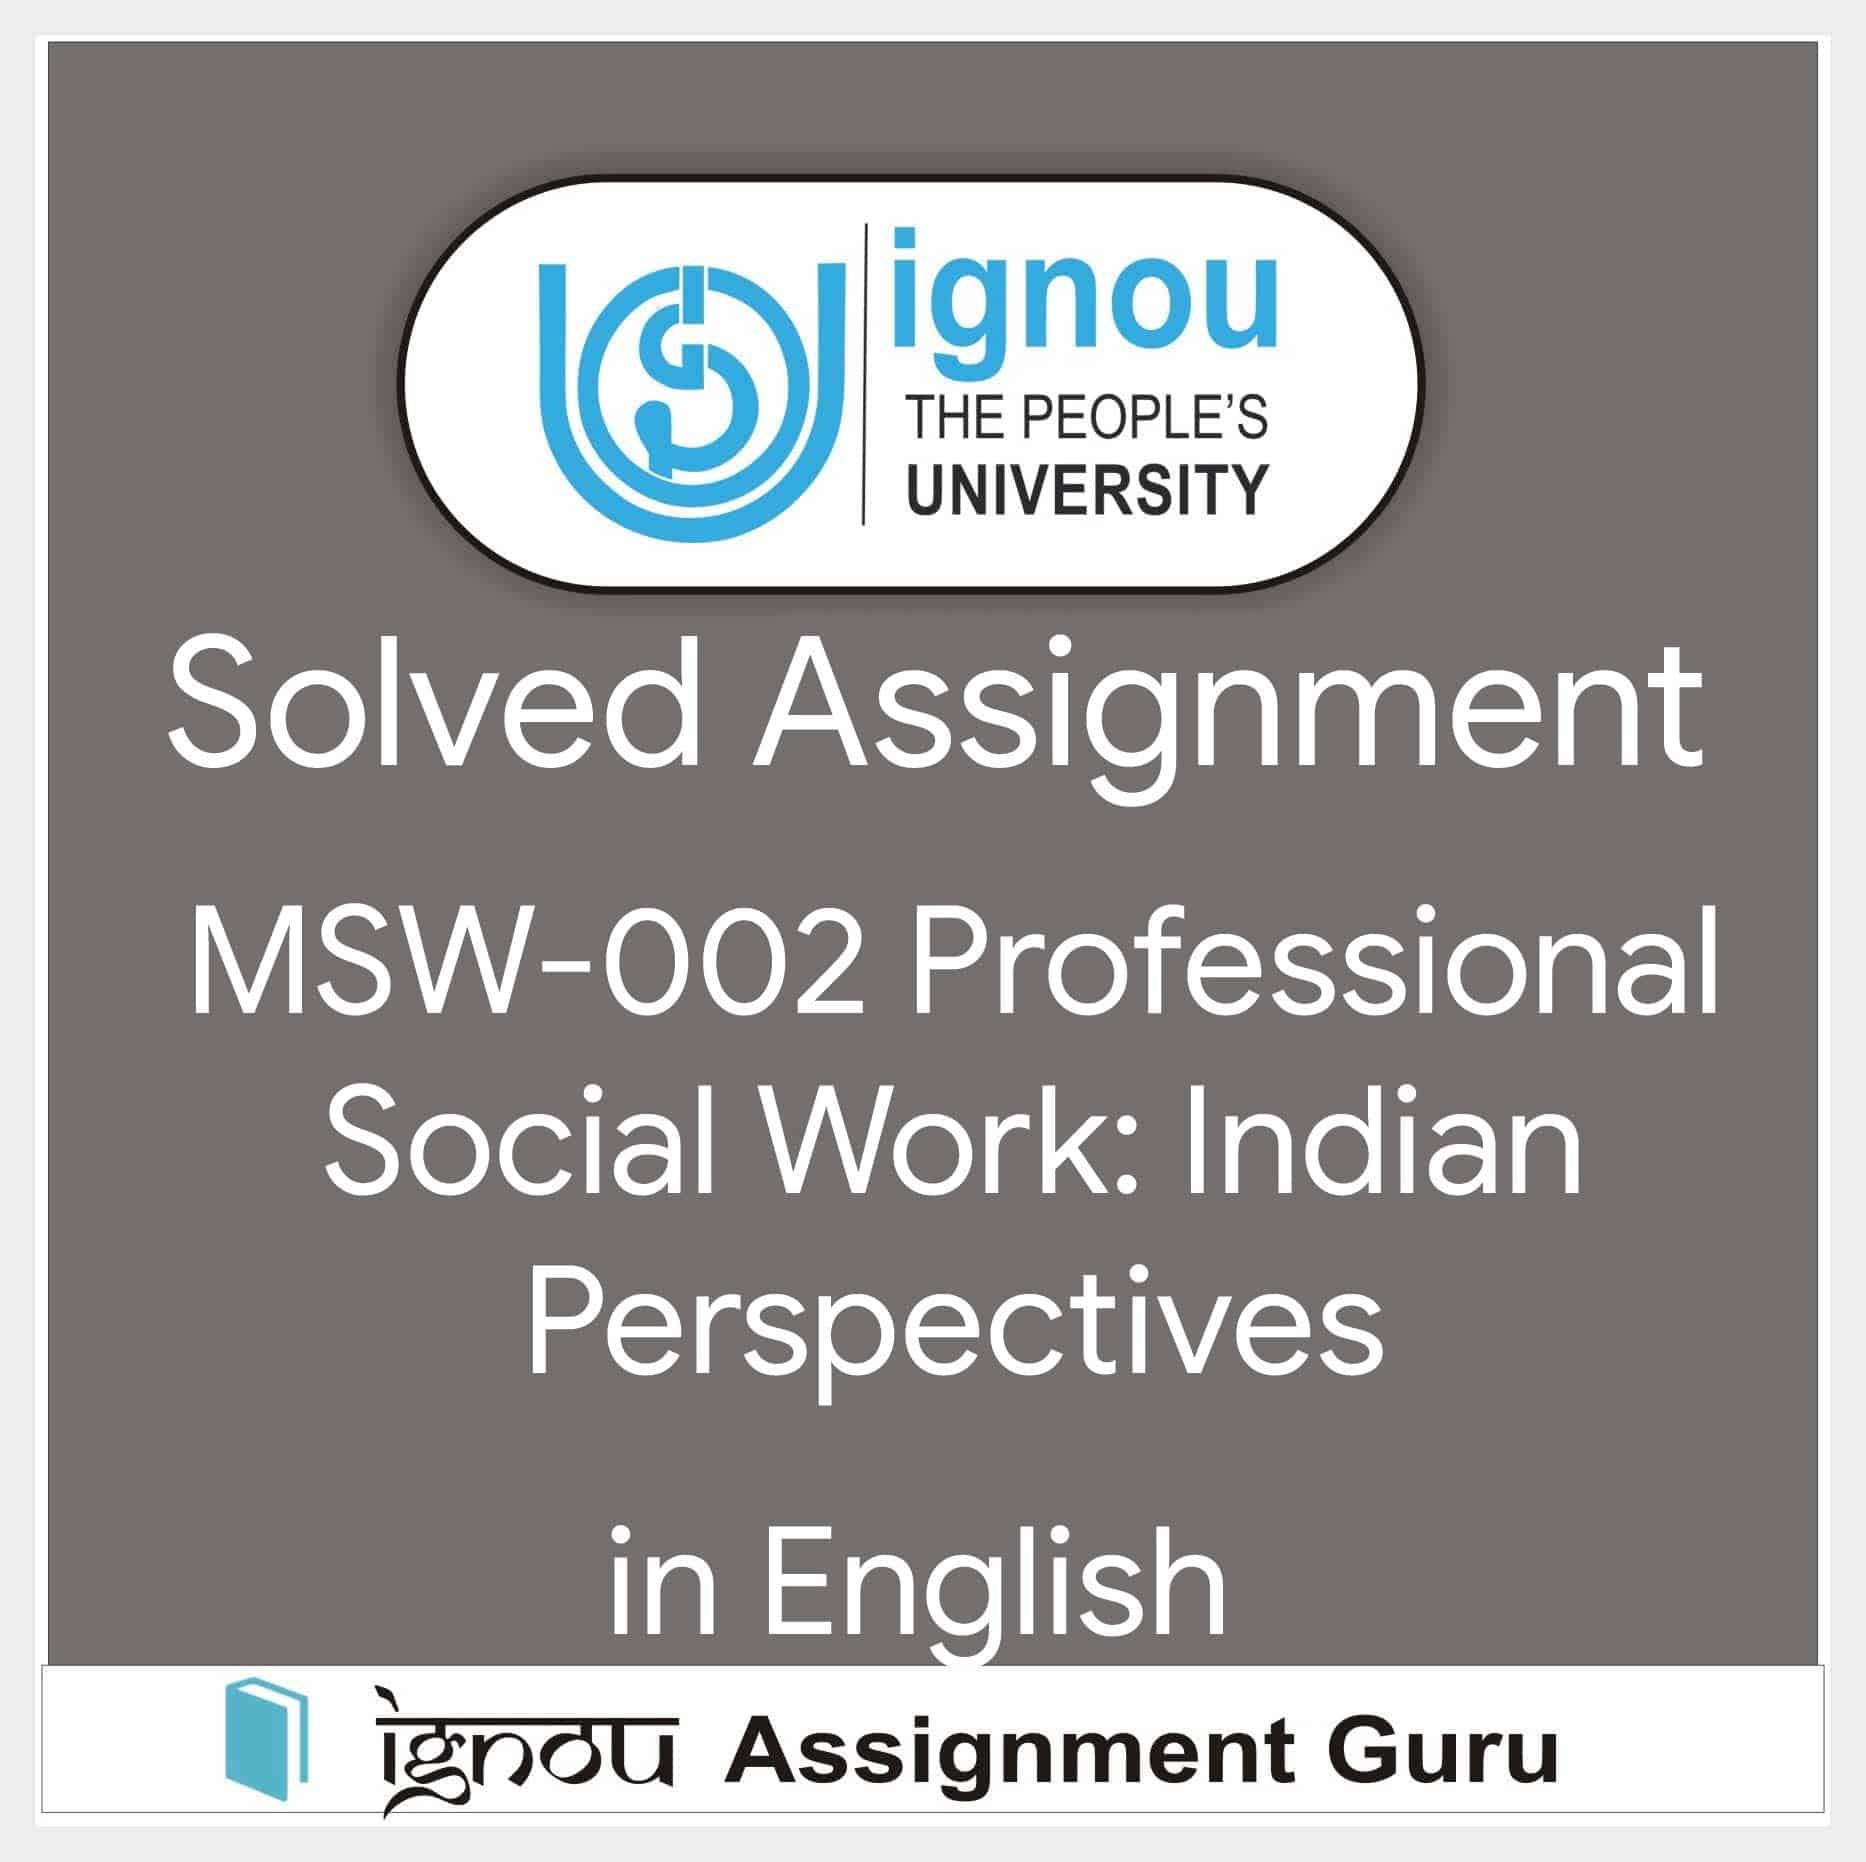 onr3 ignou assignment pdf in hindi